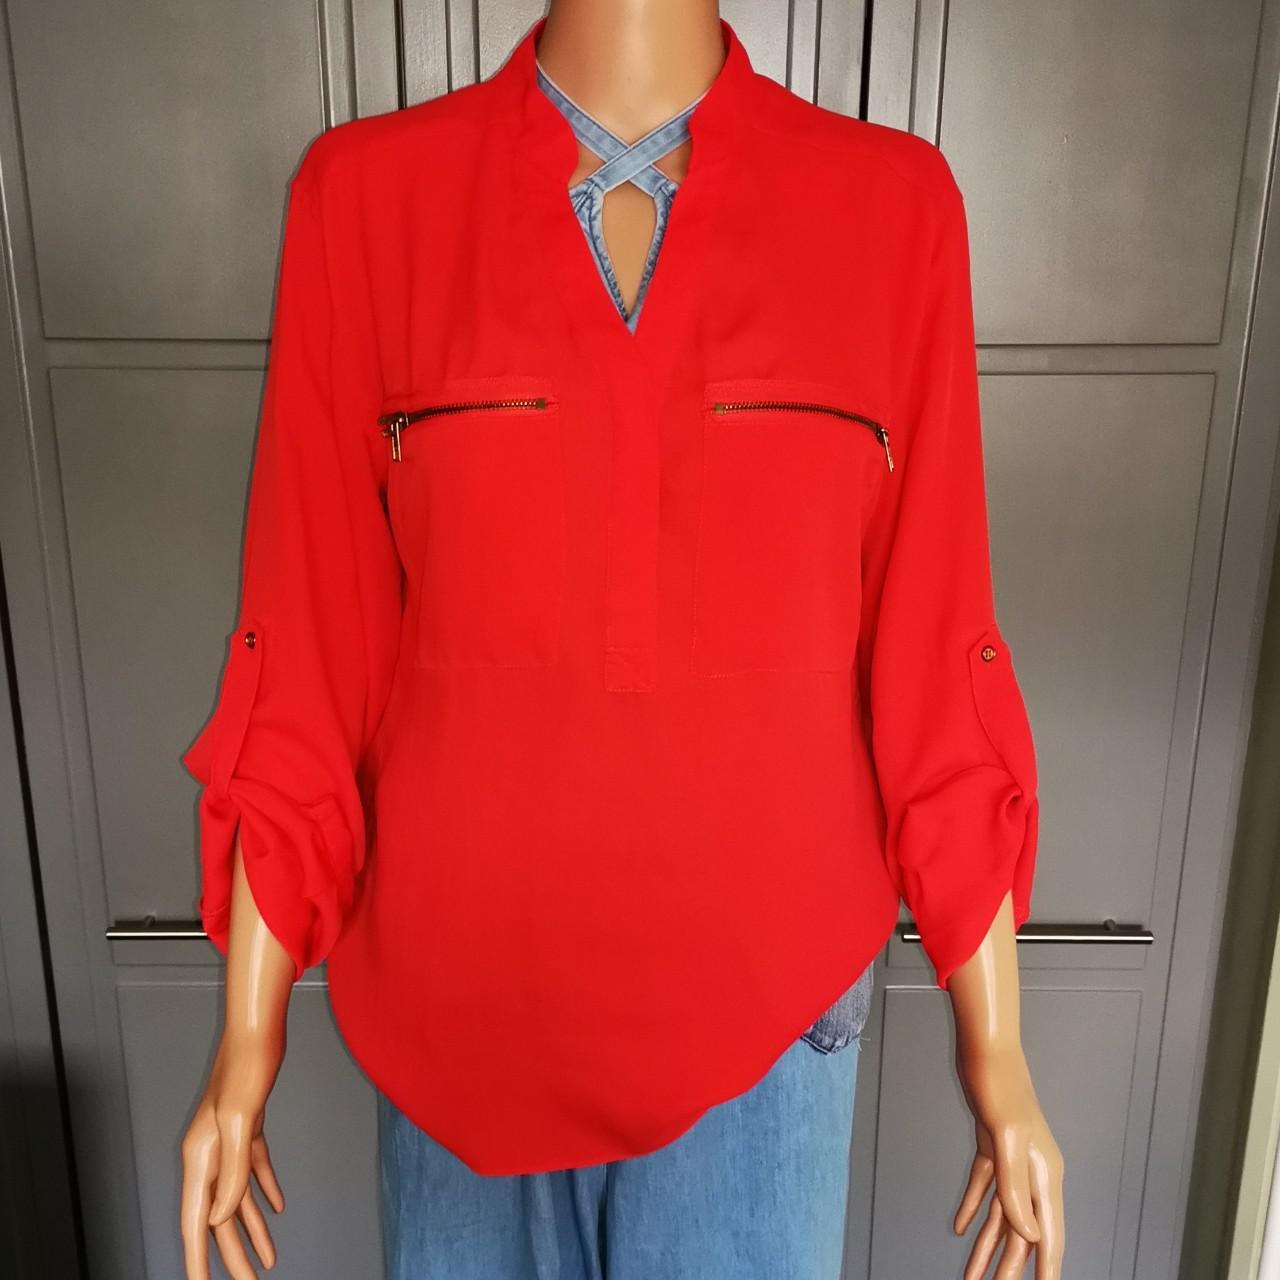 Next Women's Red Blouse